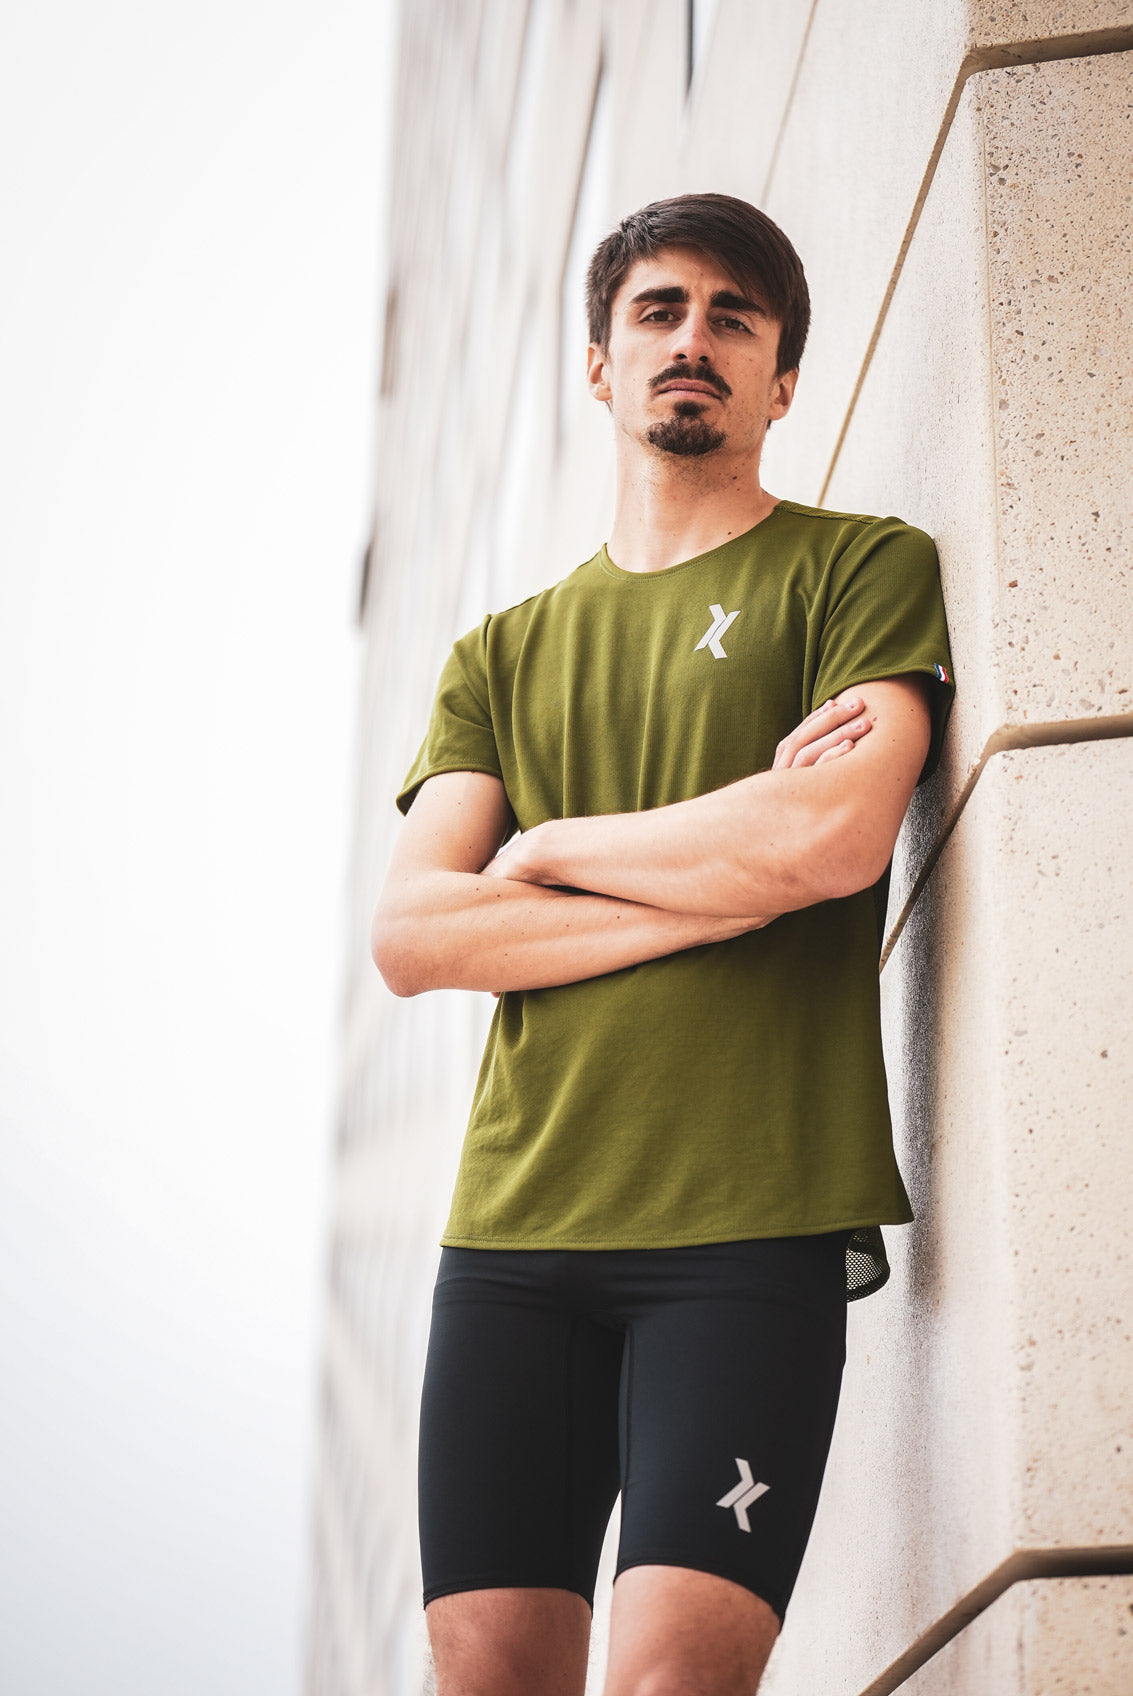 vetements de running sensus pour homme made in france